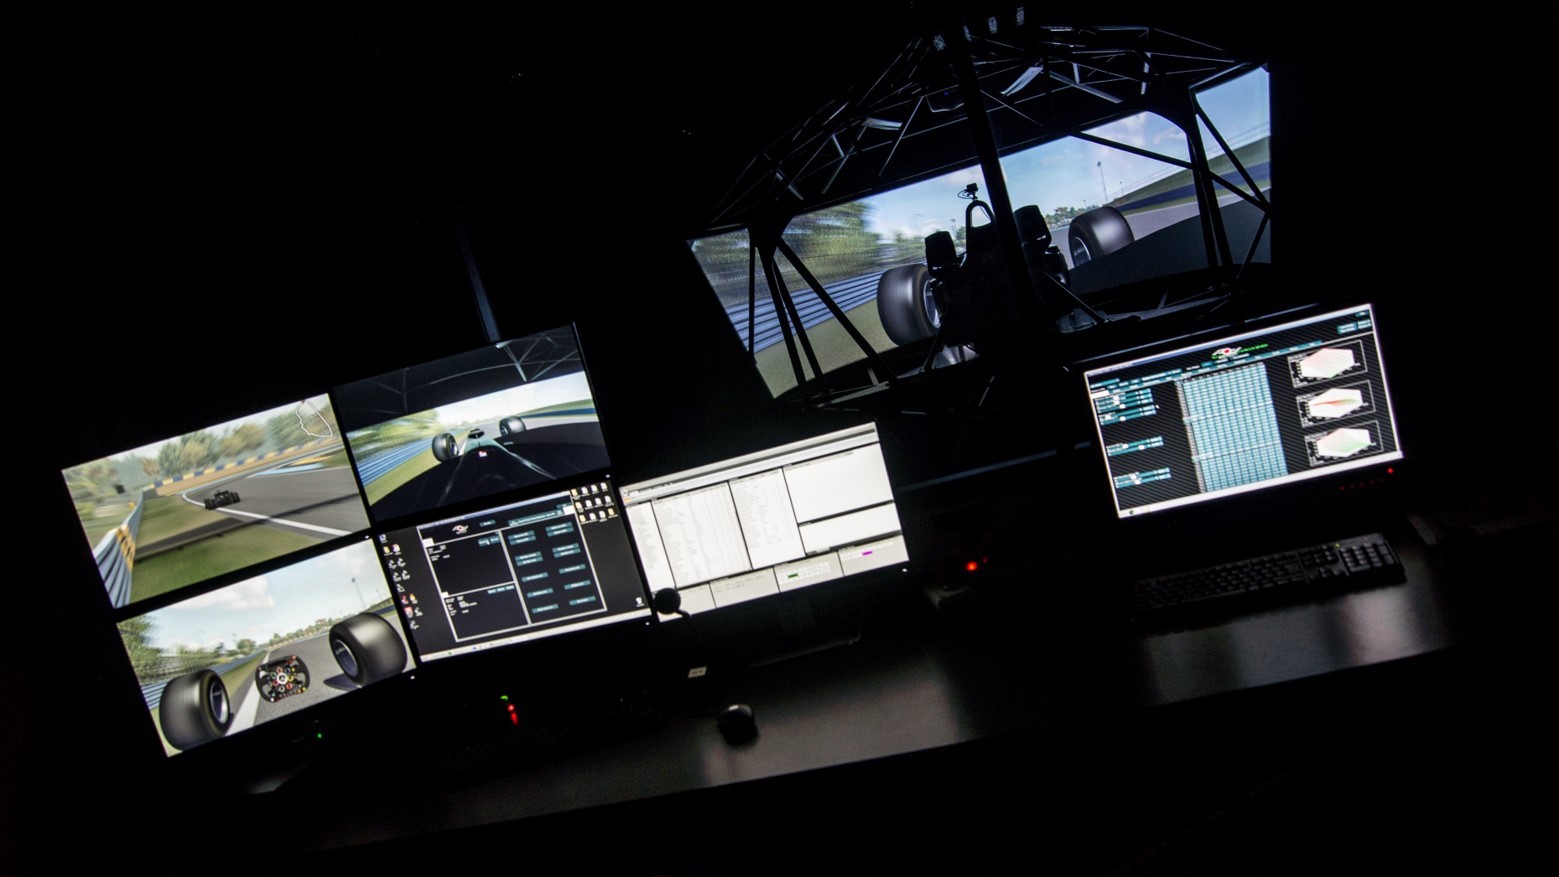 Developed and maintained by the AOTech engineering team, the simulator is a crucial resource for drivers, operational teams, automotive manufacturers, and suppliers. It offers advanced capabilities for training, testing, and performance optimization, aiding in skill enhancement, operational efficiency, and innovation within the automotive industry.